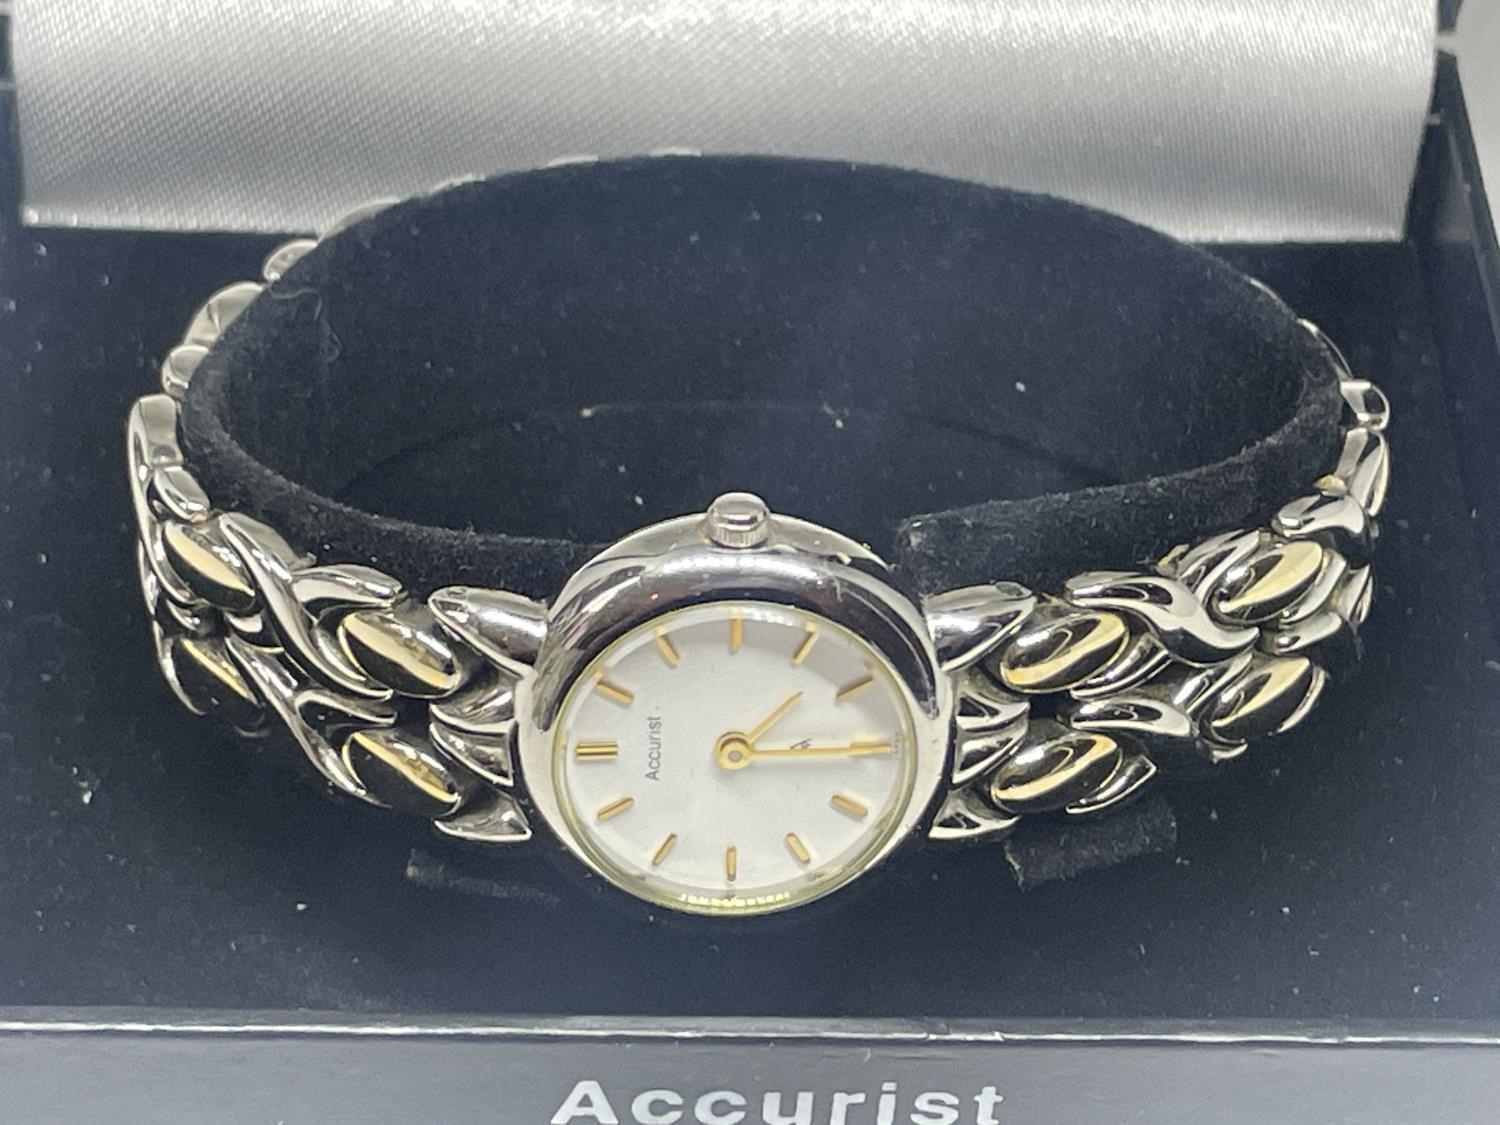 AN ACCURIST WRIST WATCH IN A PRESENTATION BOX - Image 2 of 2